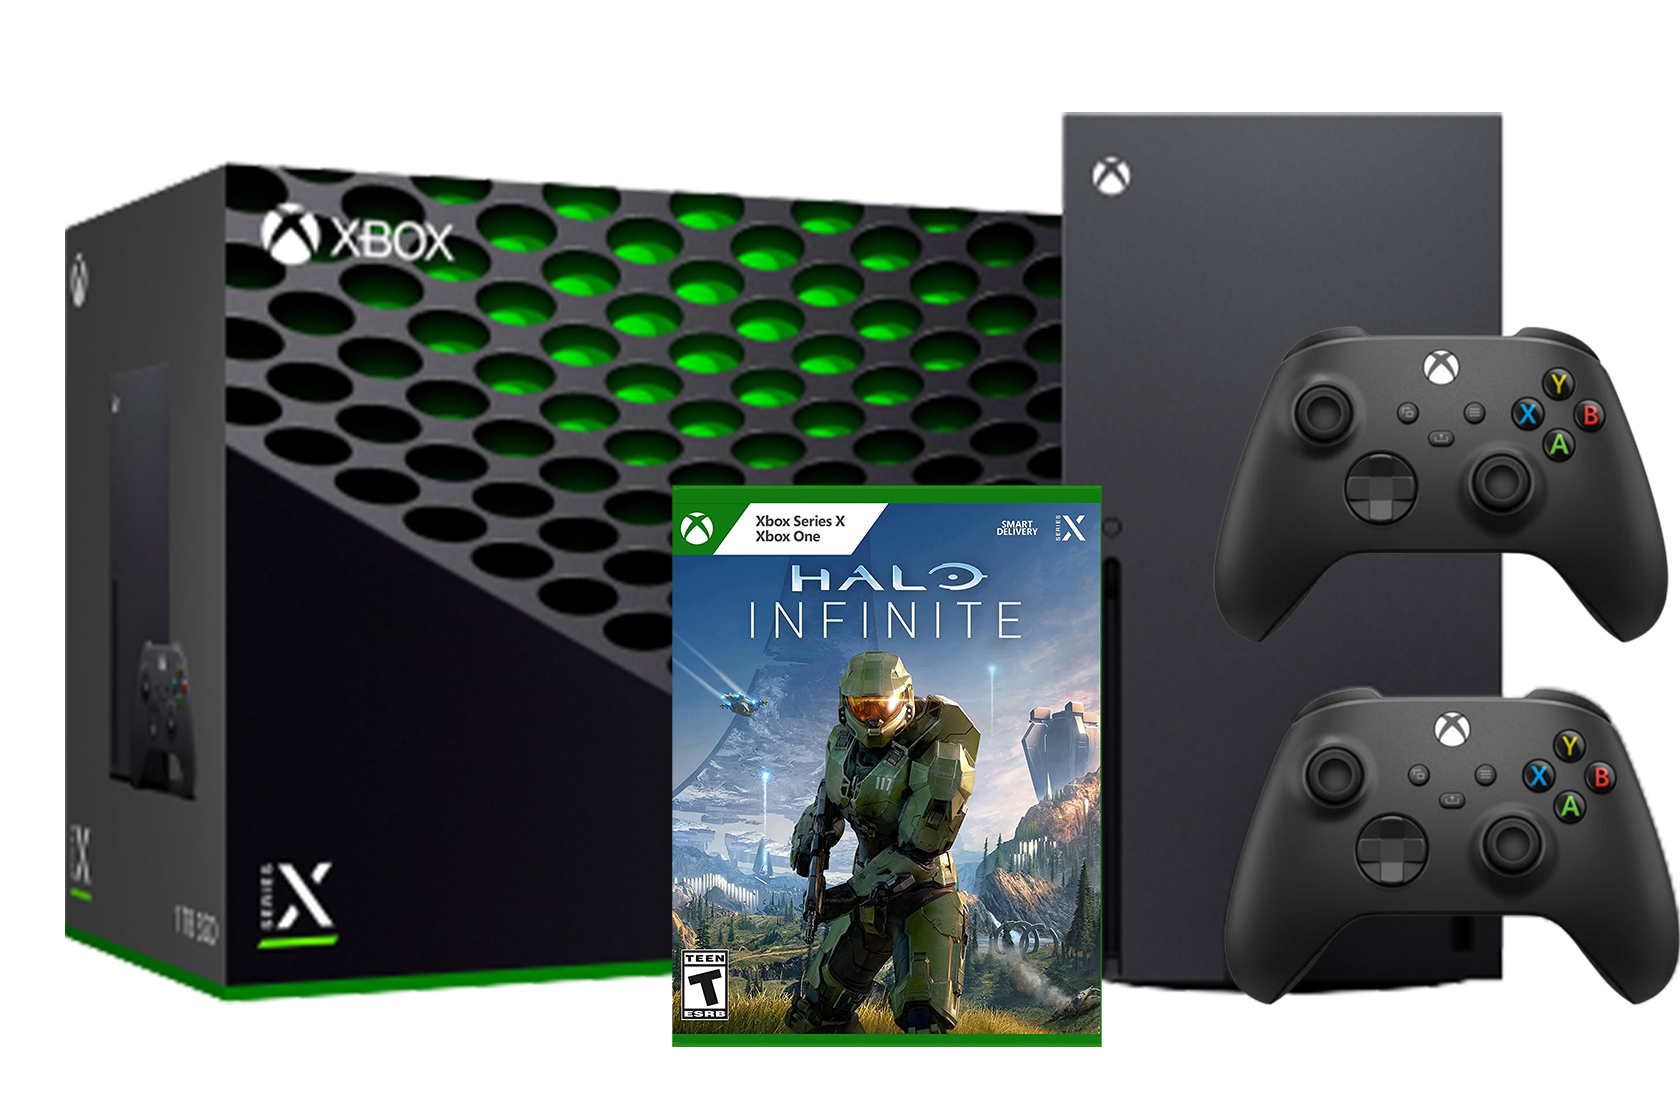 Necklet wacht Joseph Banks Get a new Xbox Series X bundle from eBay and save $150